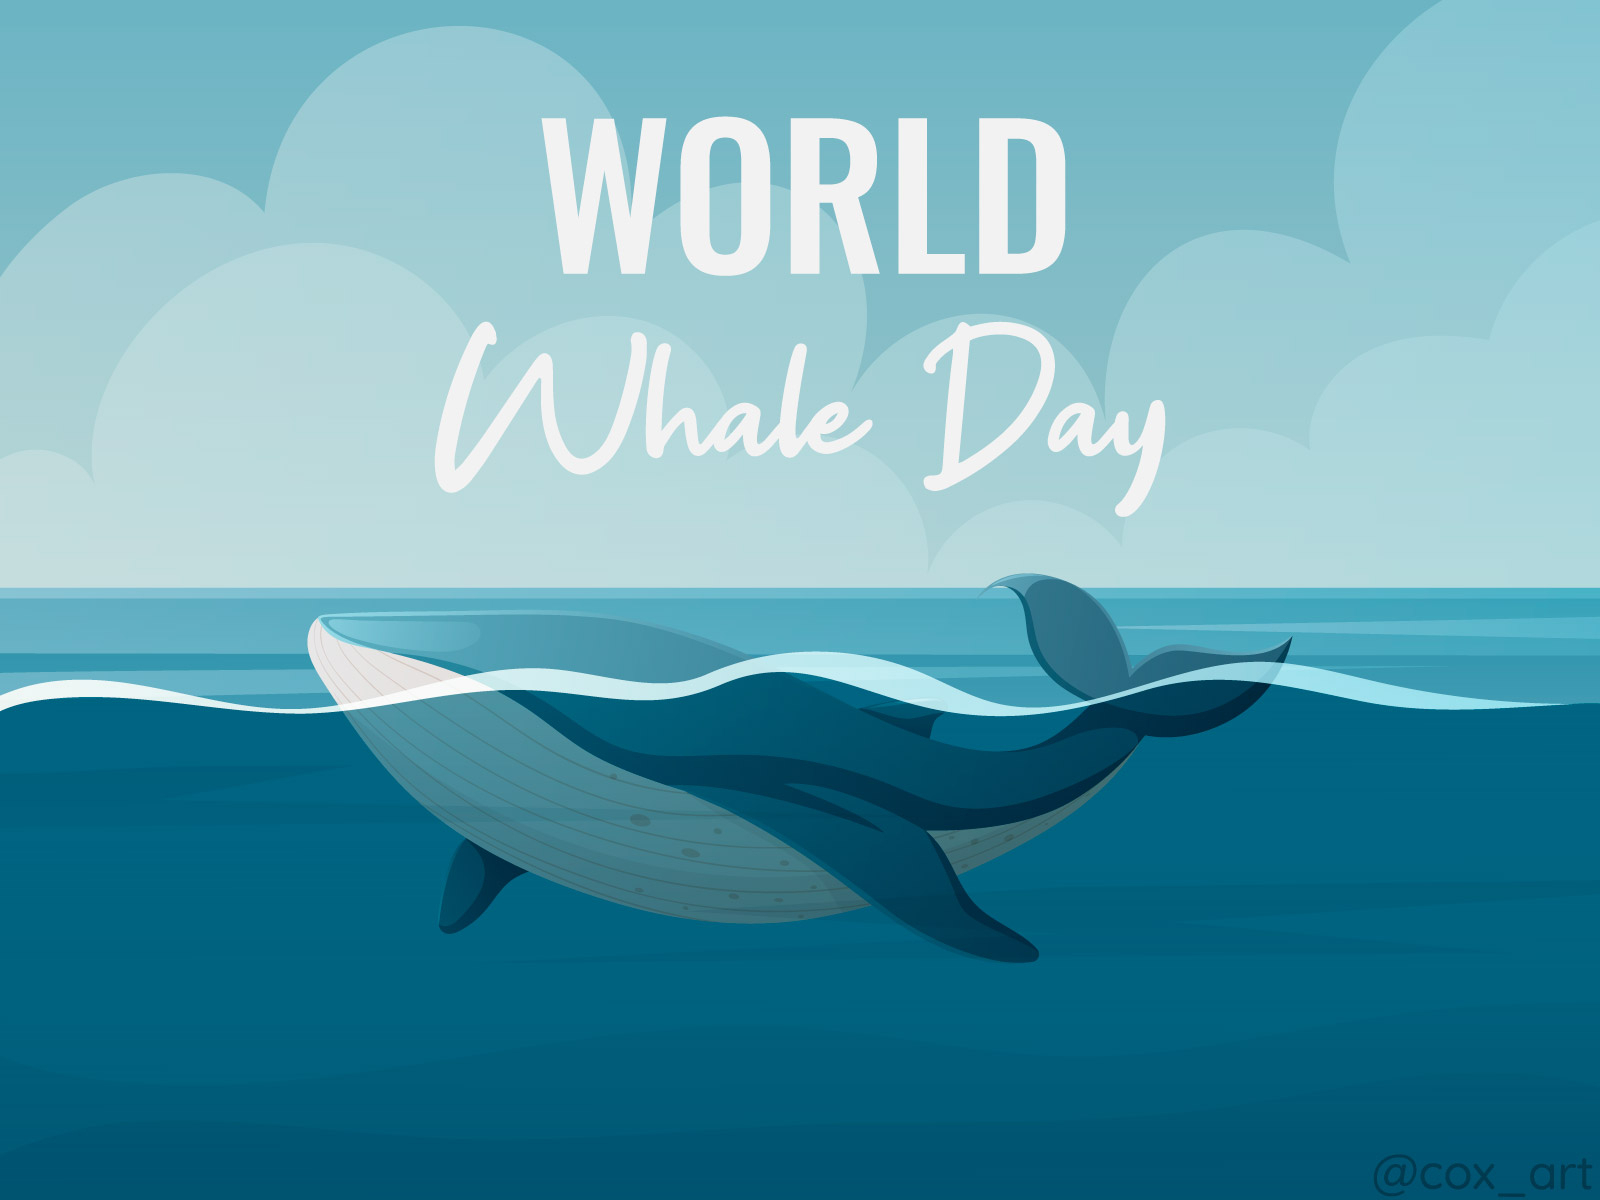 World Whale Day by Elena on Dribbble